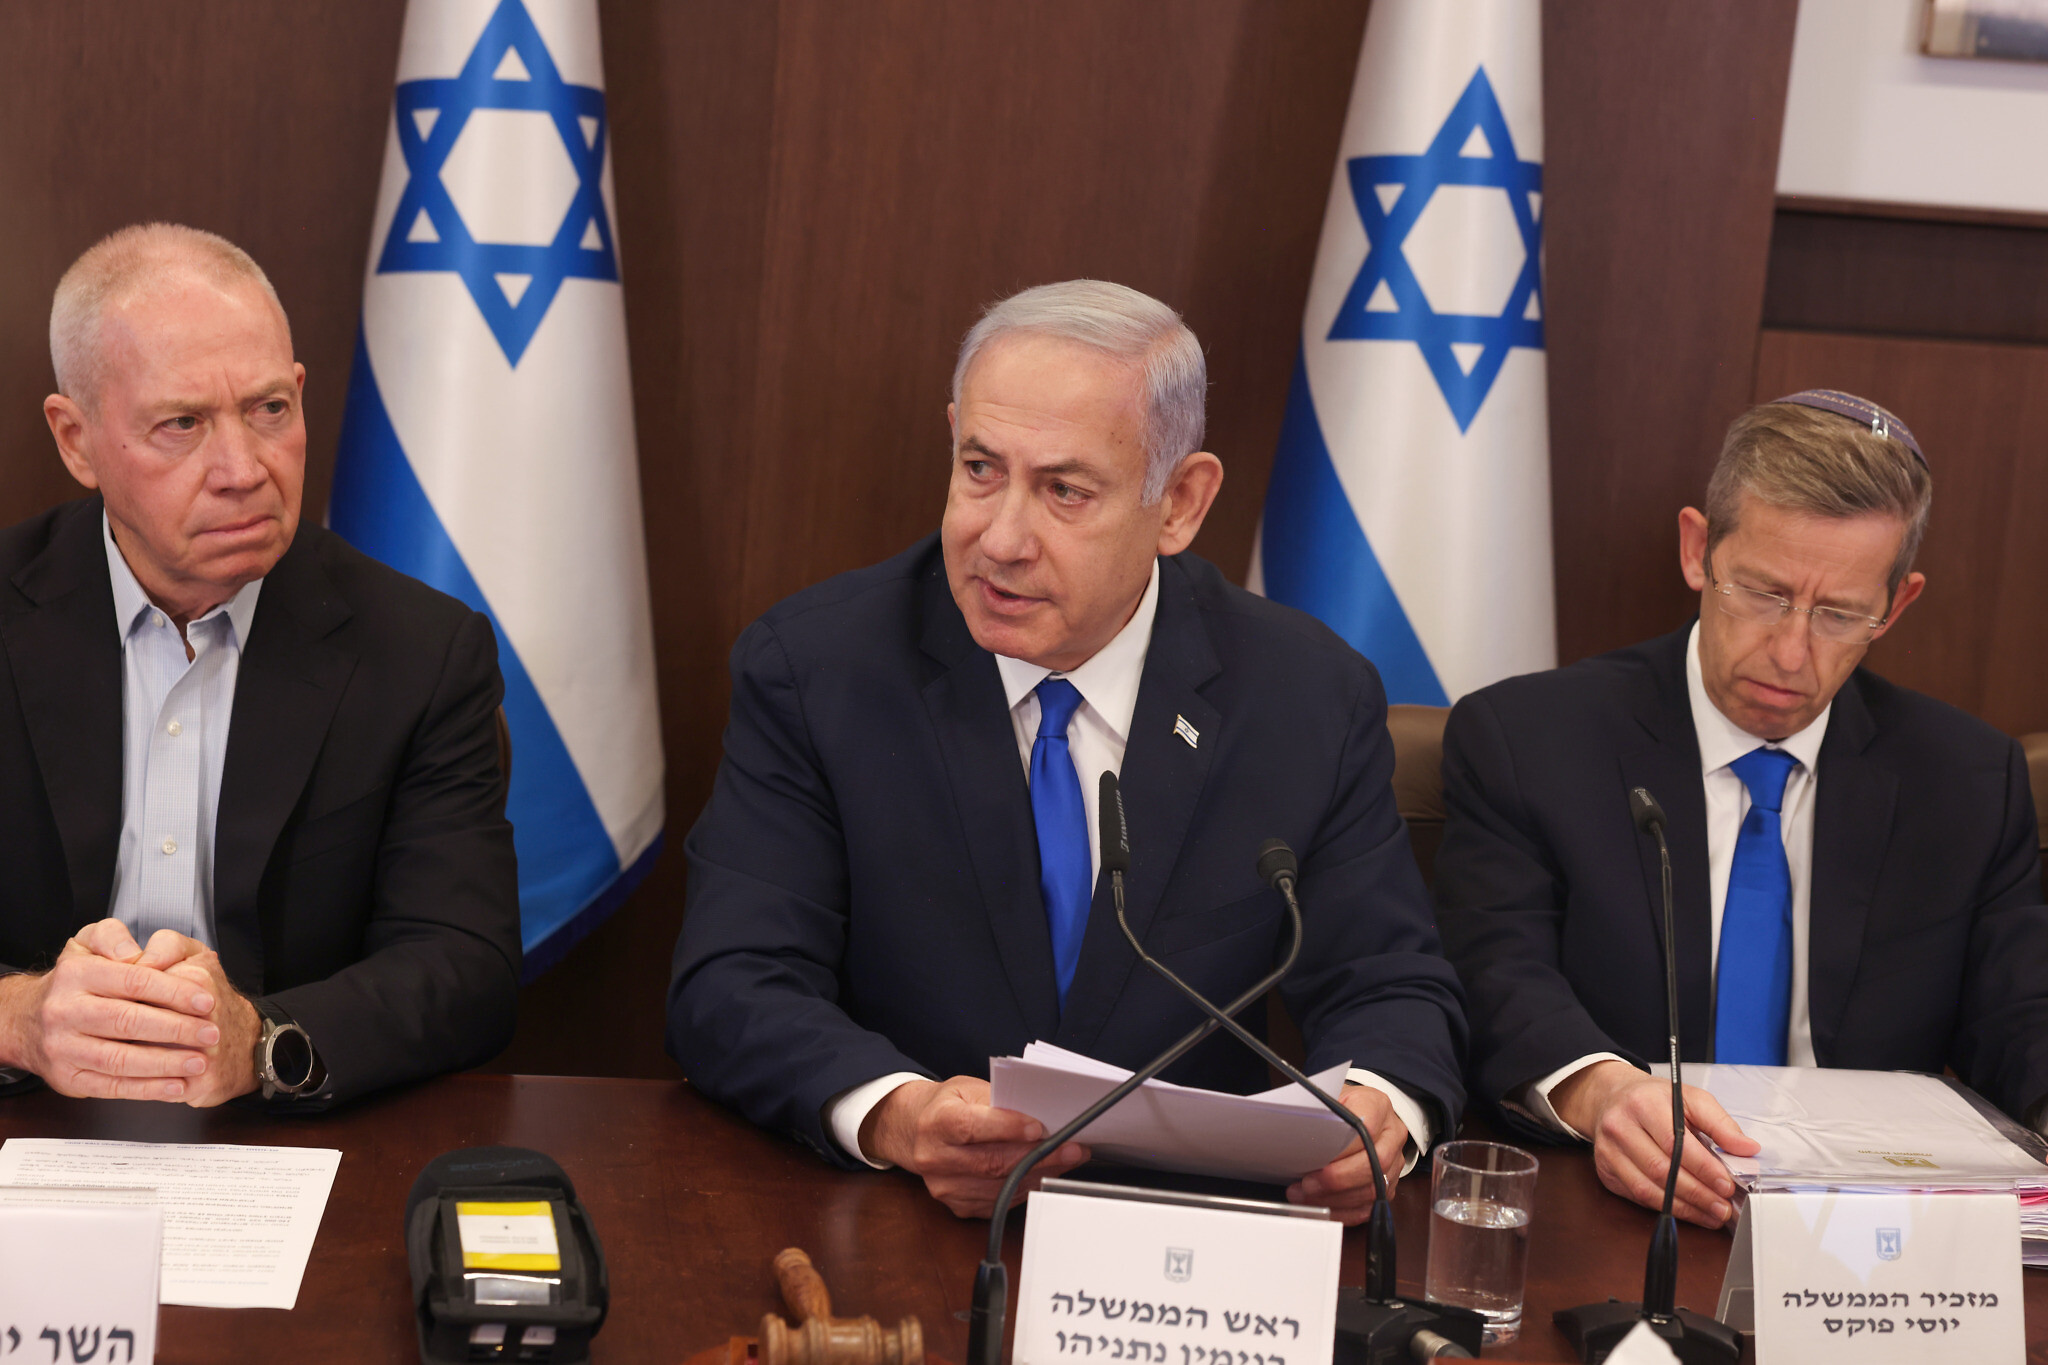 As fatalities soar, PM calls for involving Shin Bet 'immediately